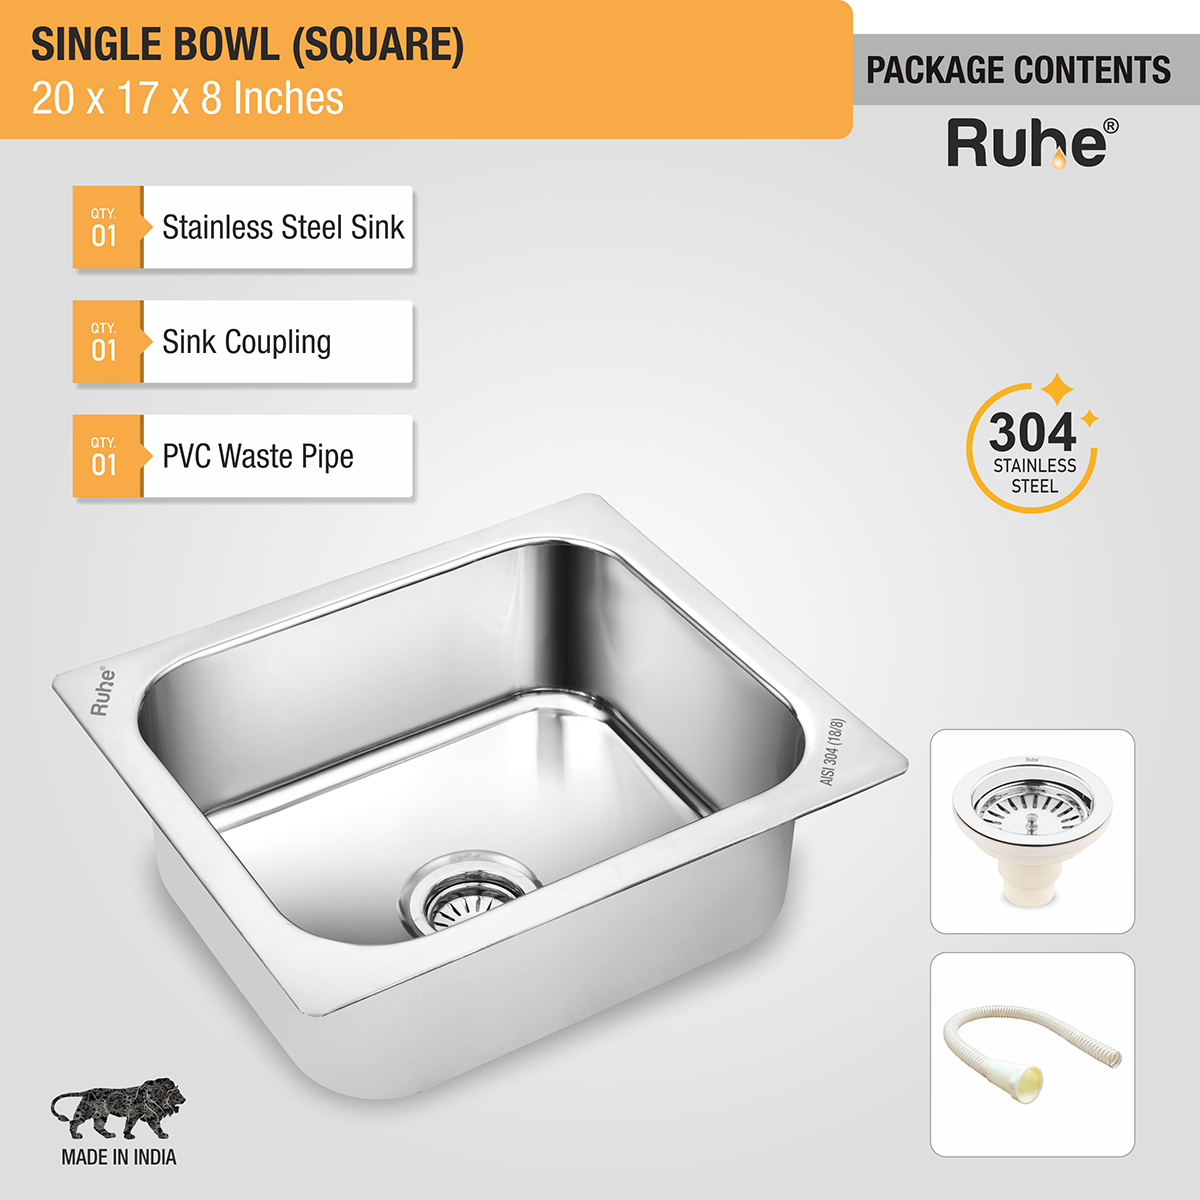 Square Single Bowl (20 x 17 x 8 inches) 304-Grade Kitchen Sink with coupling, pvc waste pipe